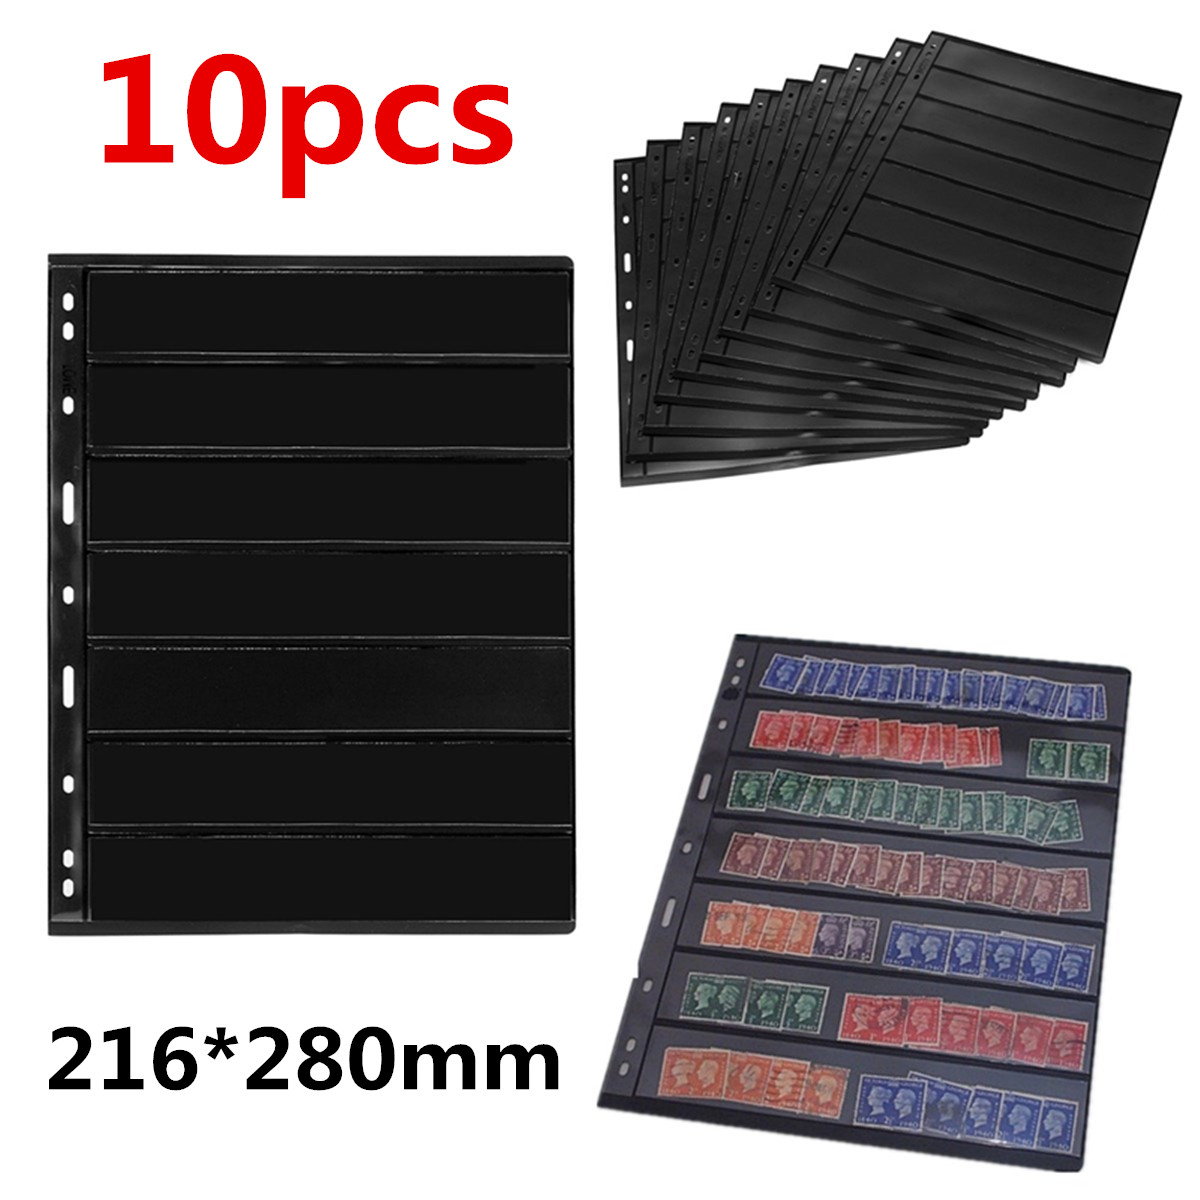 10-Sheet-of-Stamp-Stock-Black--Double-Sided-Page-7-Strips--9-Binder-Holes-1956269-1